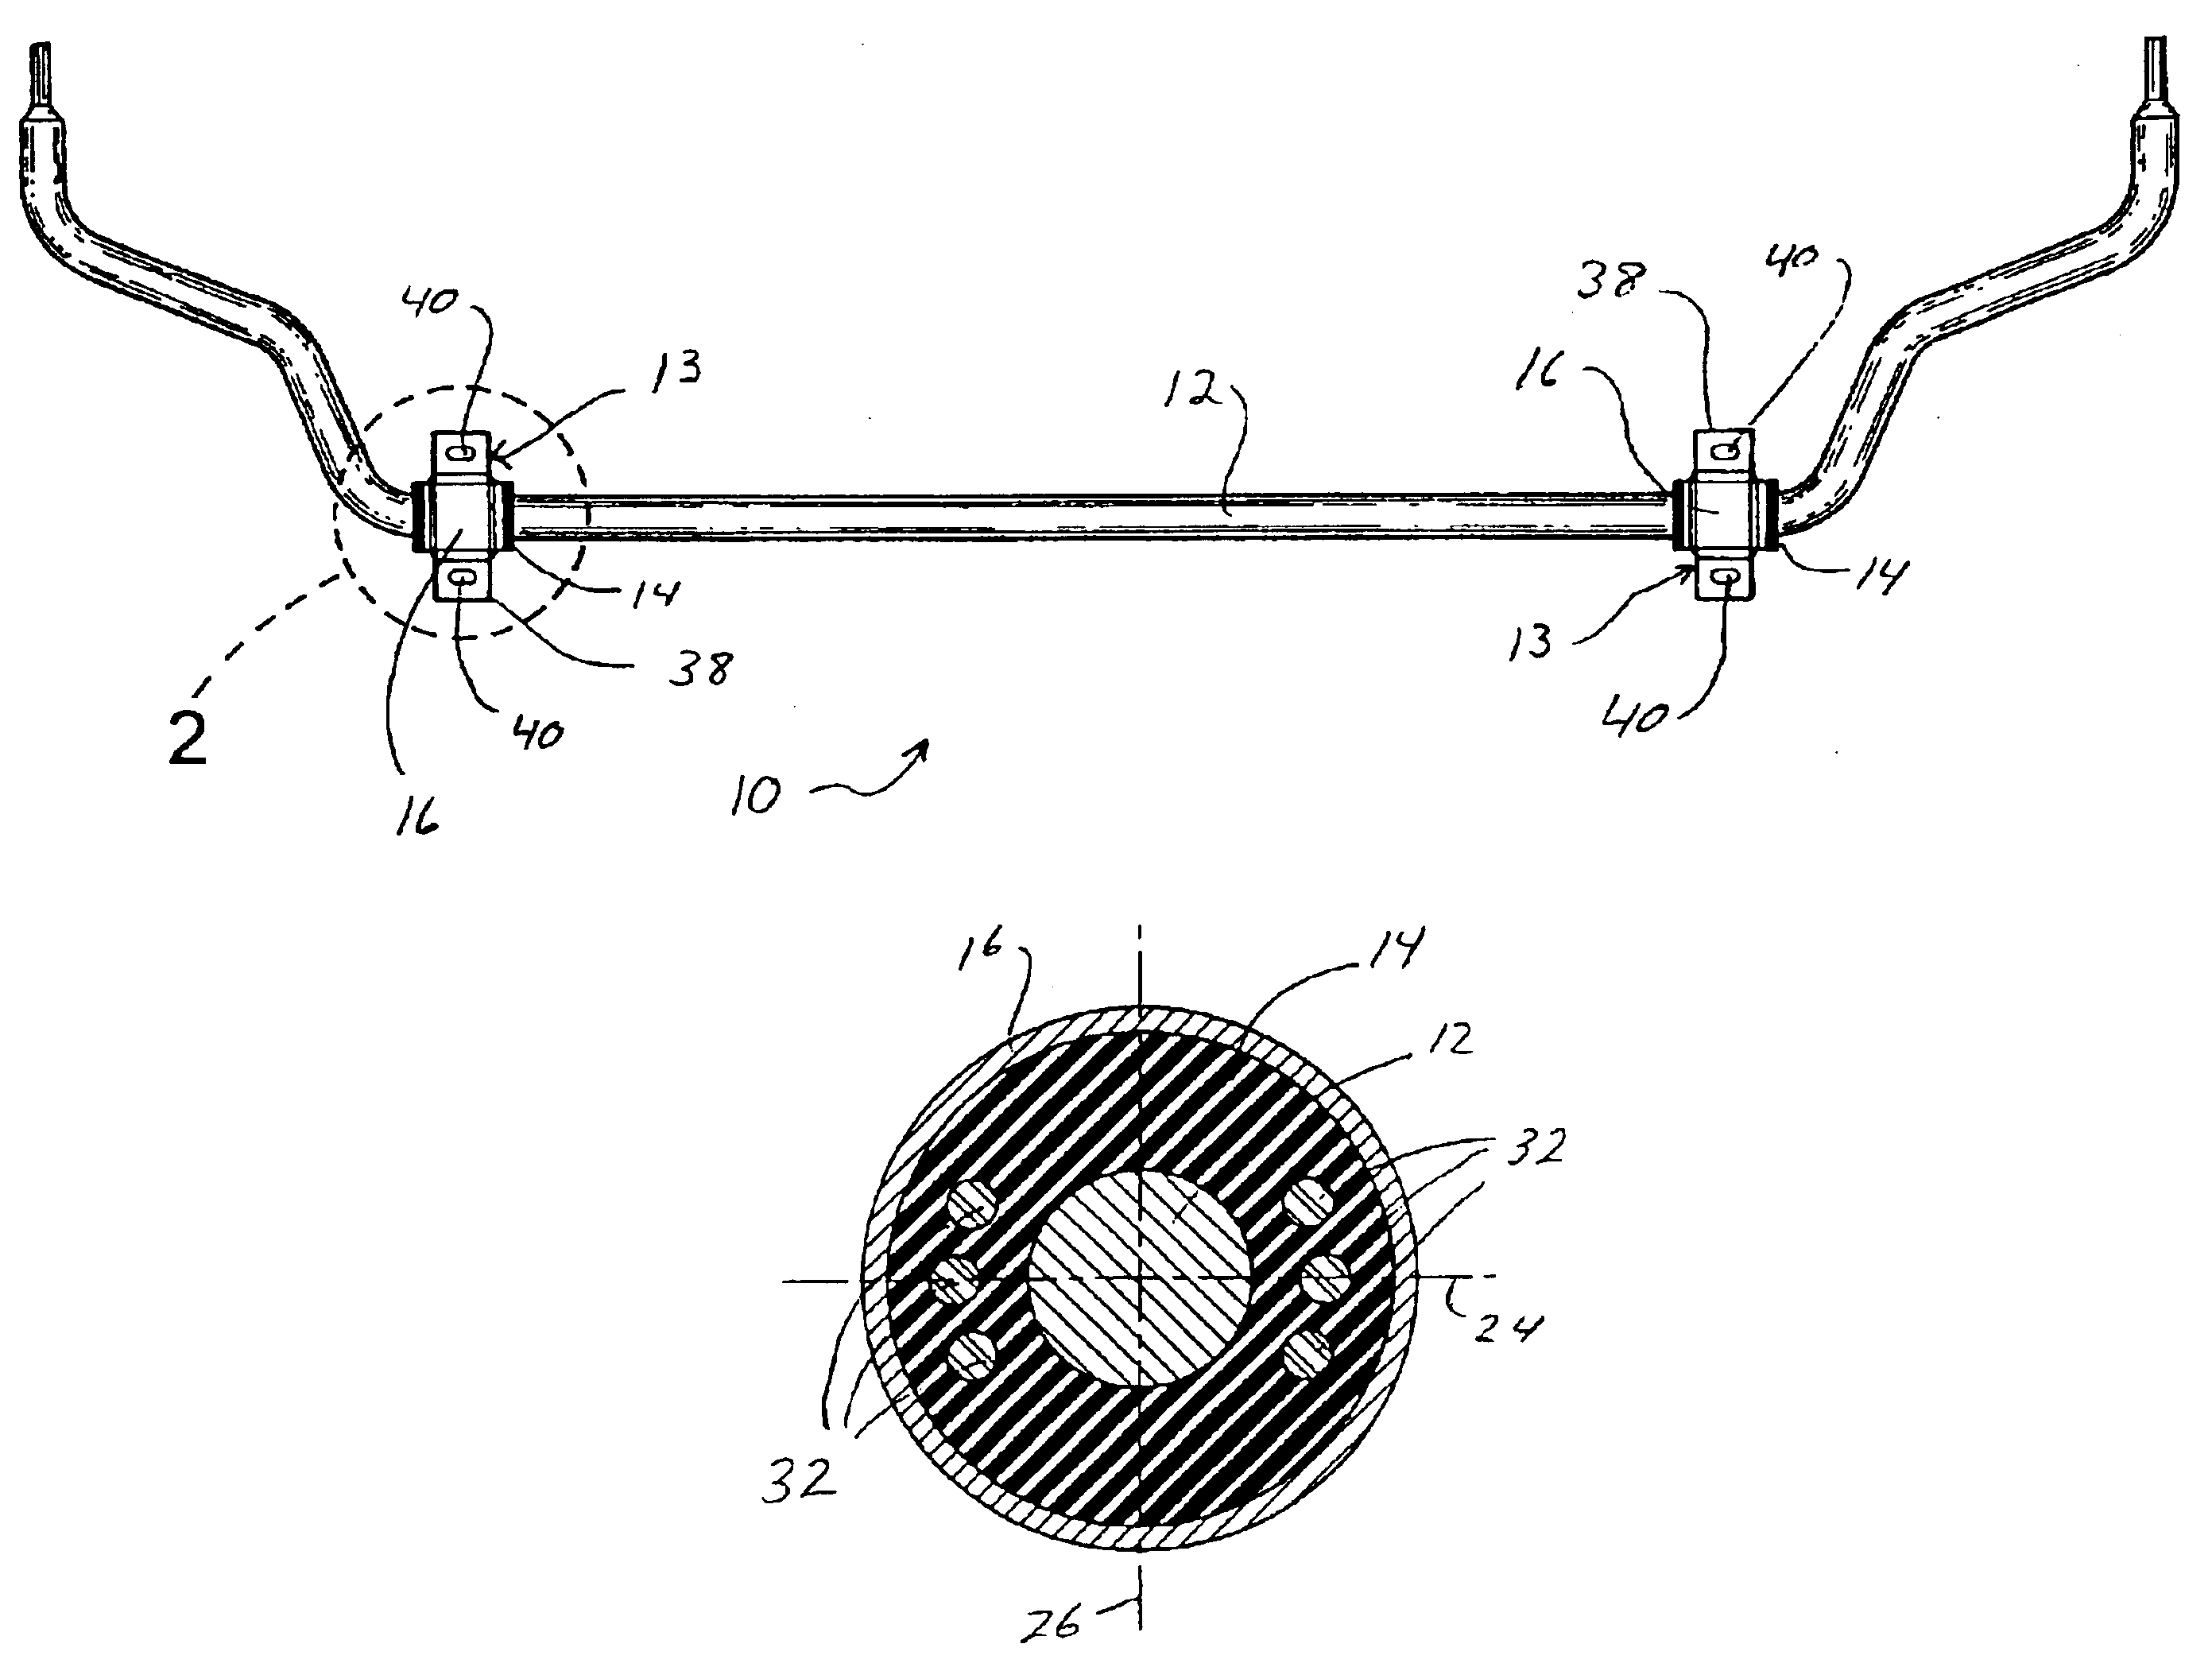 Gripped bushing system with alternating radial stiffness